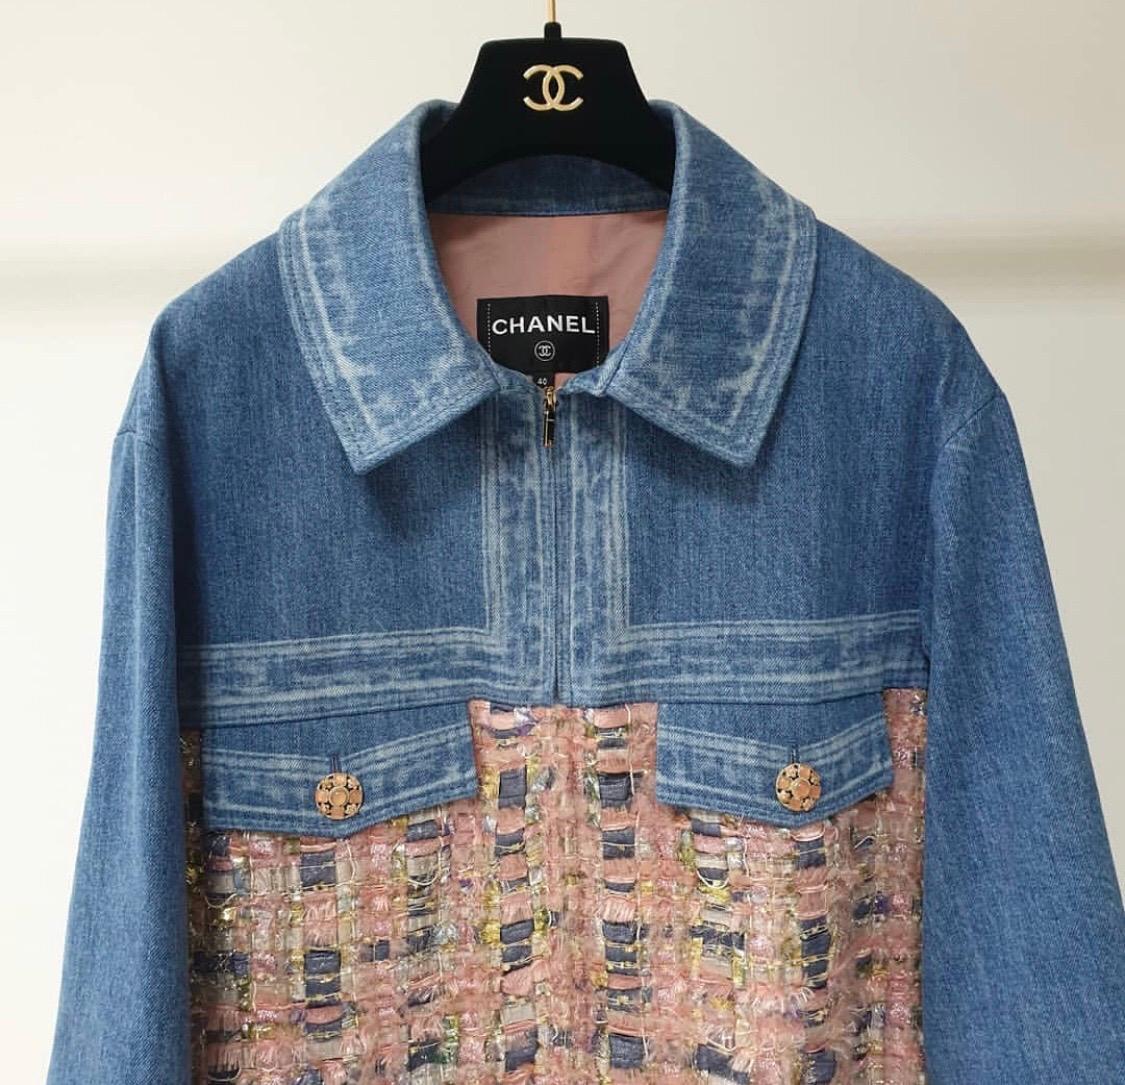 For the Chanel Fall-Winter 2016/17 Ready-to-Wear, Karl Lagerfeld revisits the allure and the codes of the House in a very contemporary spirit.
Gorgeous jacket in very good condition.
Denim/Tweed< chiffon sleeves.
Sz.40

For buyers from EU we can